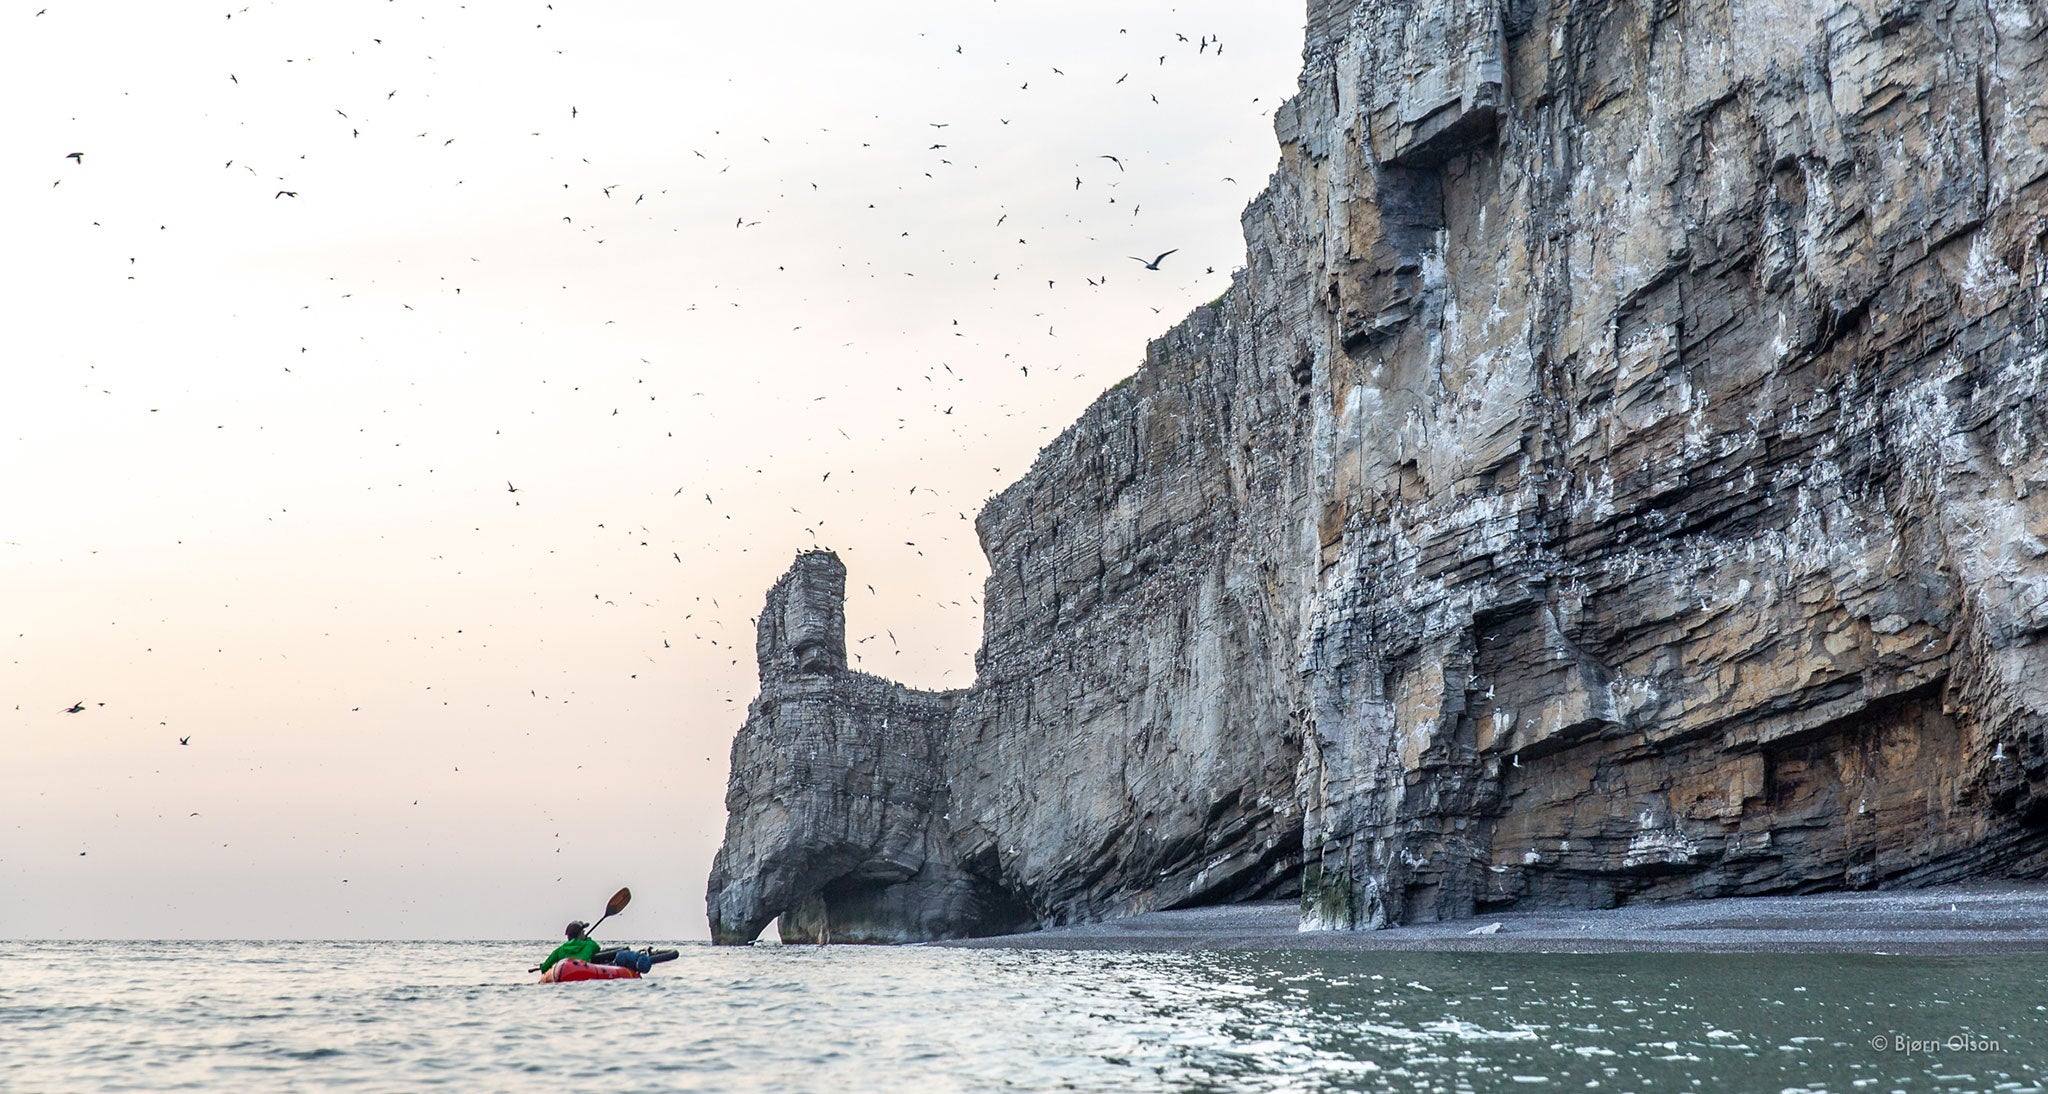 Ultralight packrafter looks at a swarm of birds over seaside cliff